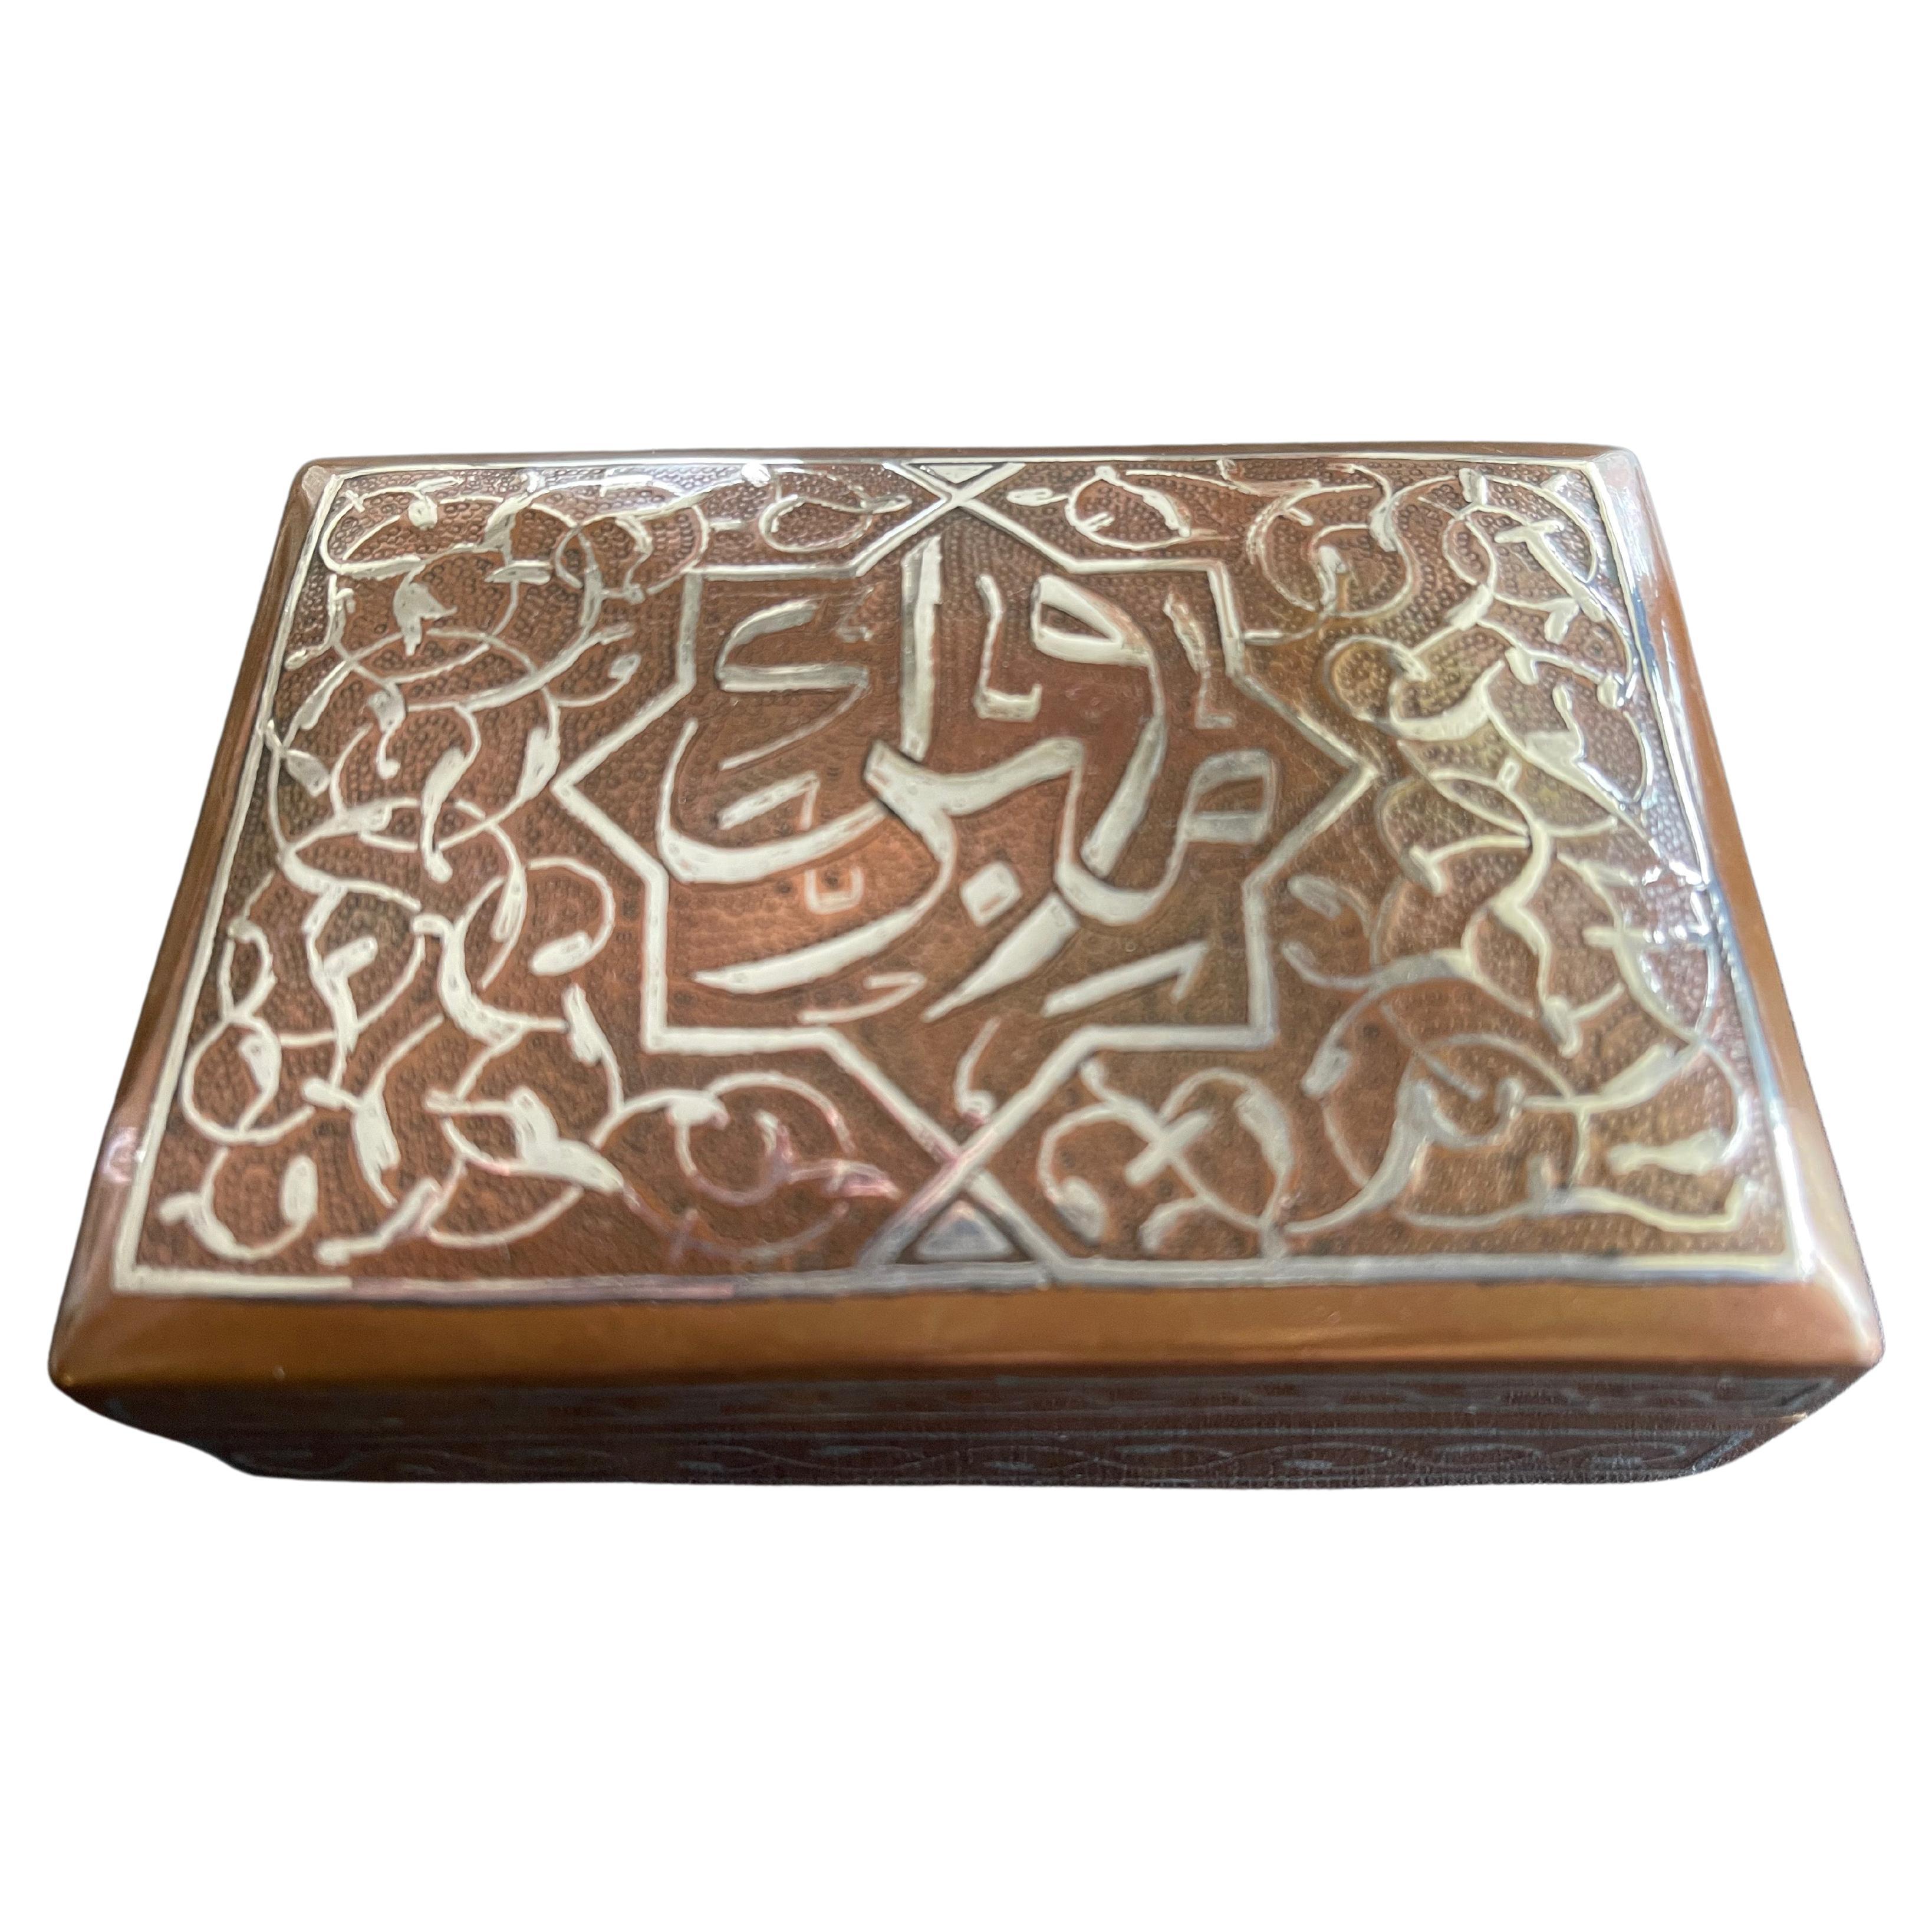 Antique Islamic silver calligraphy damascened copper jewelry box with hinged lid. Copper is finely hand hammered into a wonderful texture. Interior fully lined in cedar wood. Egypt, c. 1920's.

 